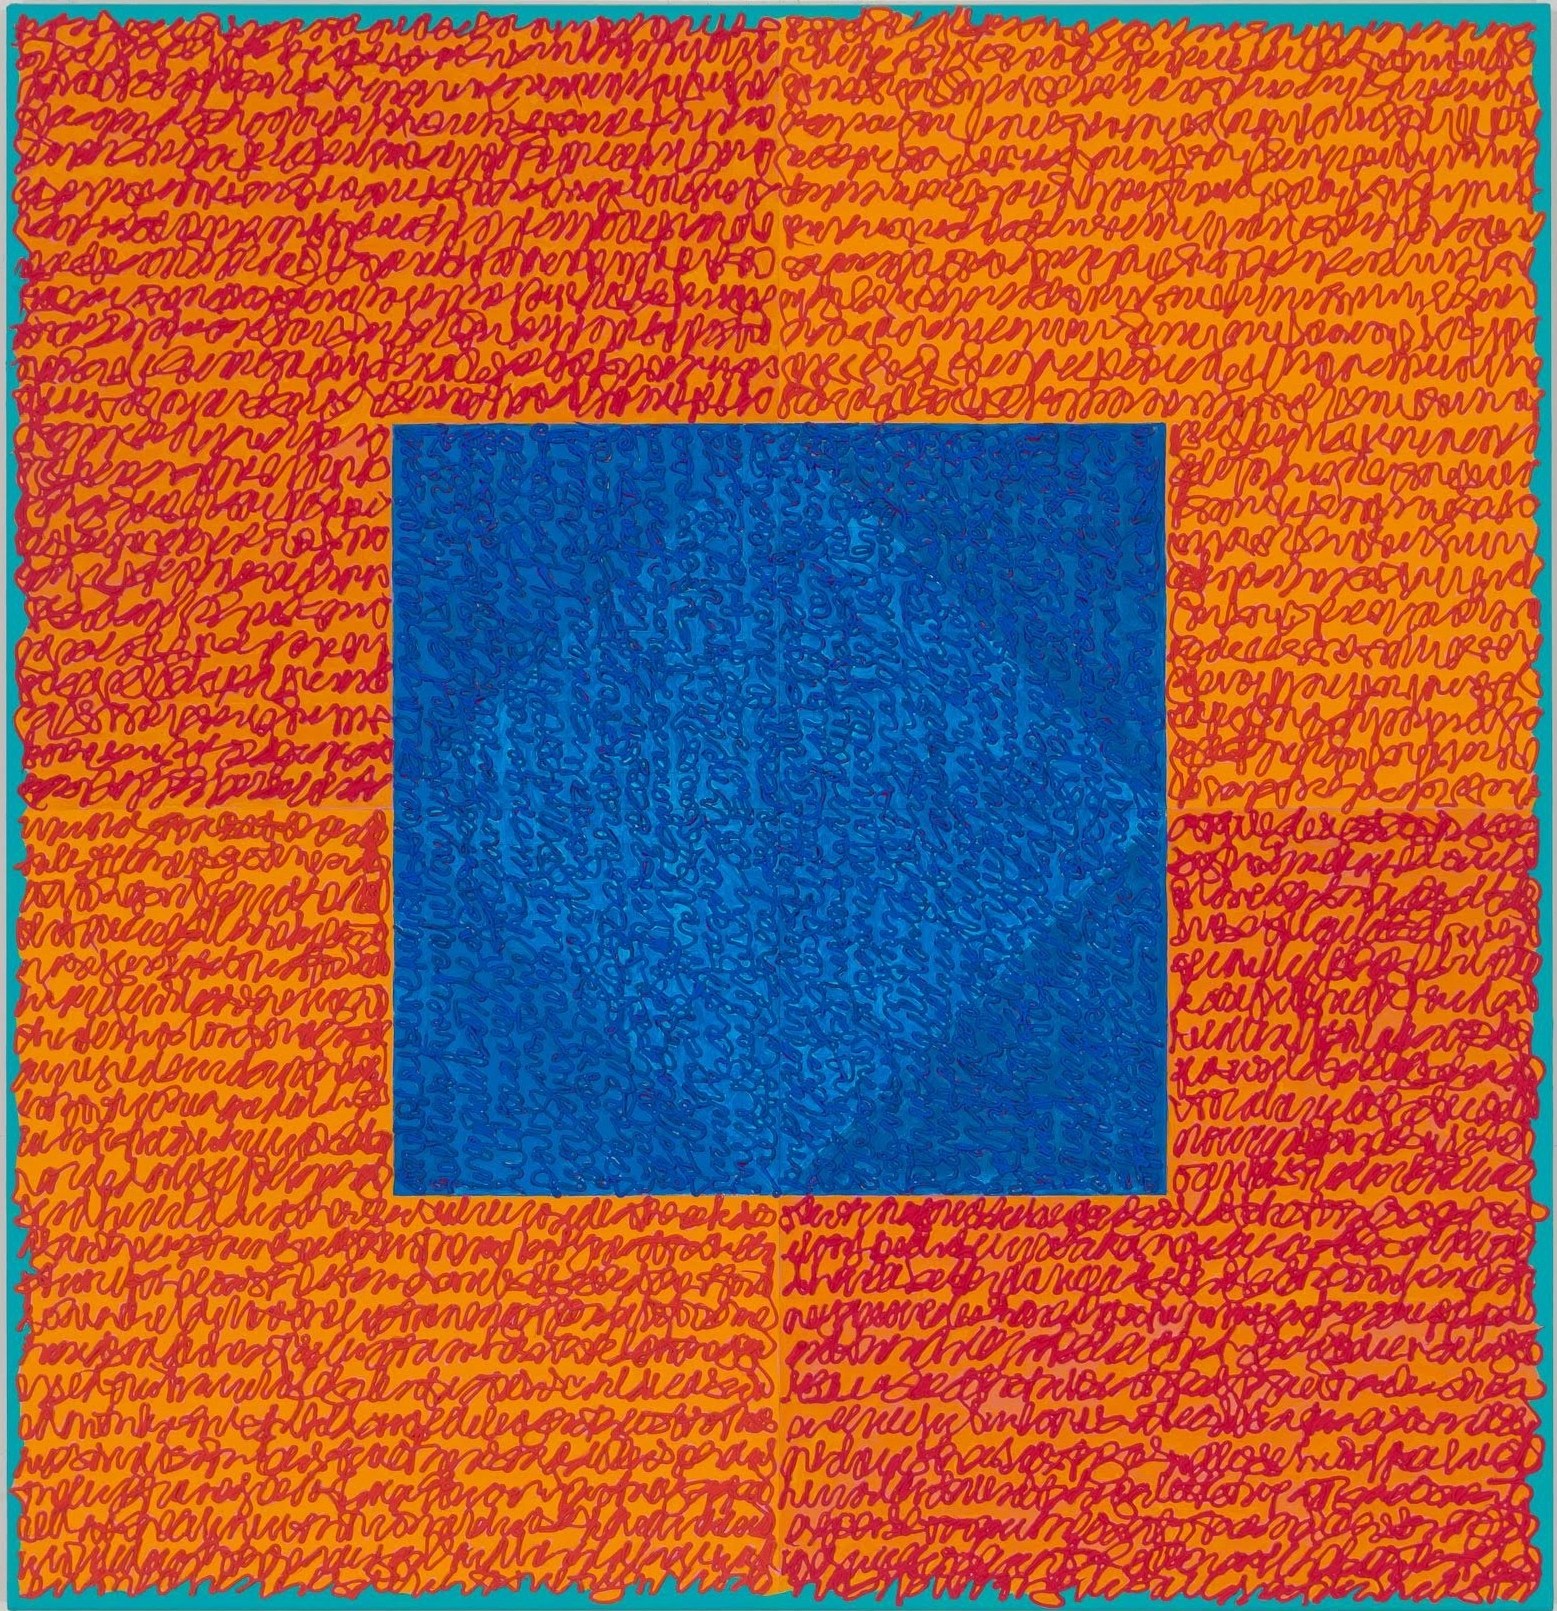 Louise P. Sloane, Sizzler, 2017, Acrylic paints and pastes on aluminum panel, 46 x 44 inches, four rectangles and a central square (blue and orange) with personal text written in red-orange over the squares to create three dimensional texture. Louise P. Sloane has been creating abstract paintings since 1974. Her works focus on geometric forms while celebrating color and texture.